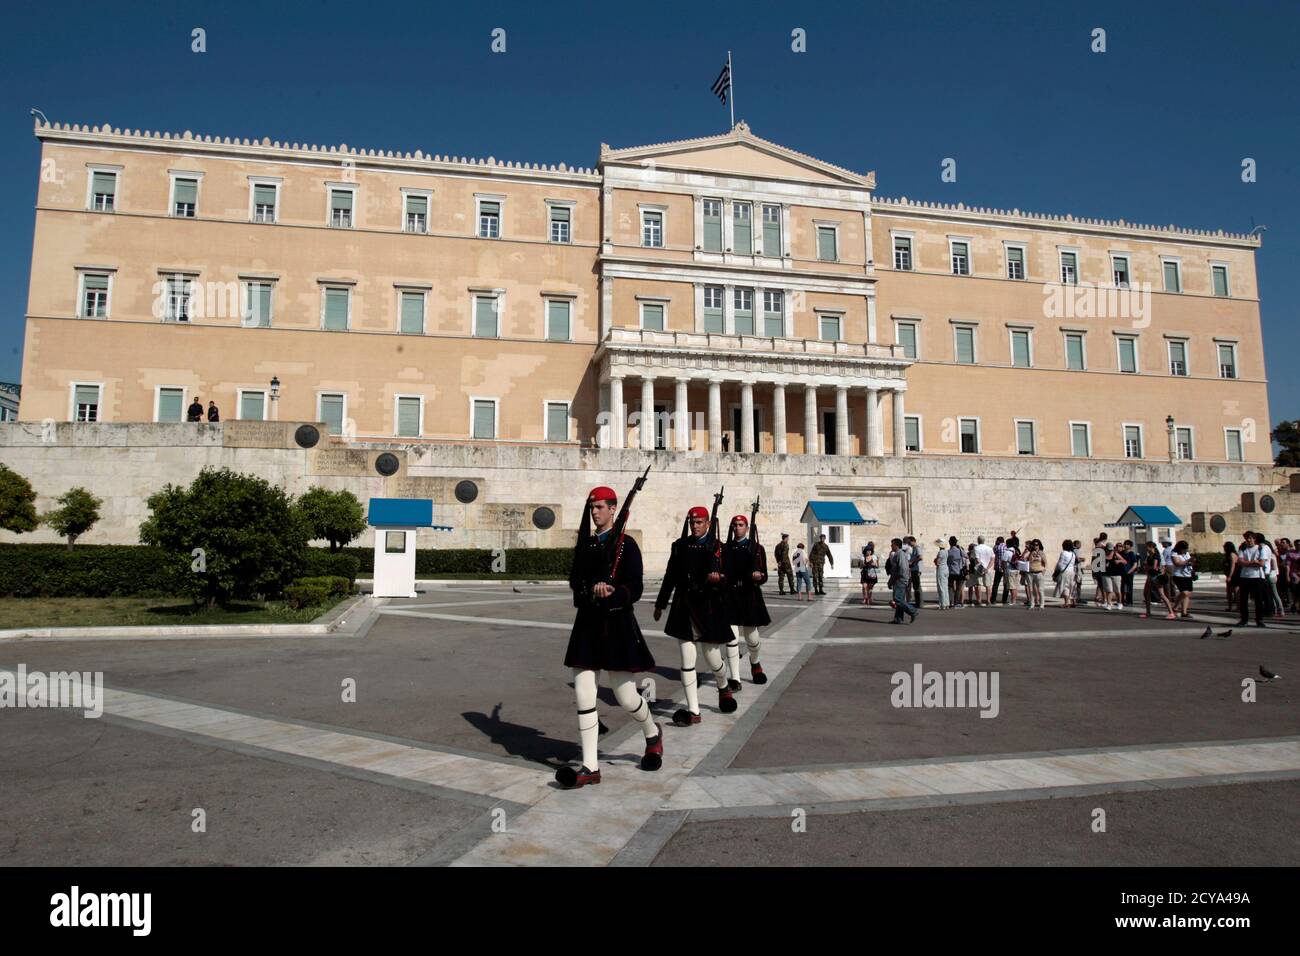 Hardship Greece High Resolution Stock Photography and Images - Alamy